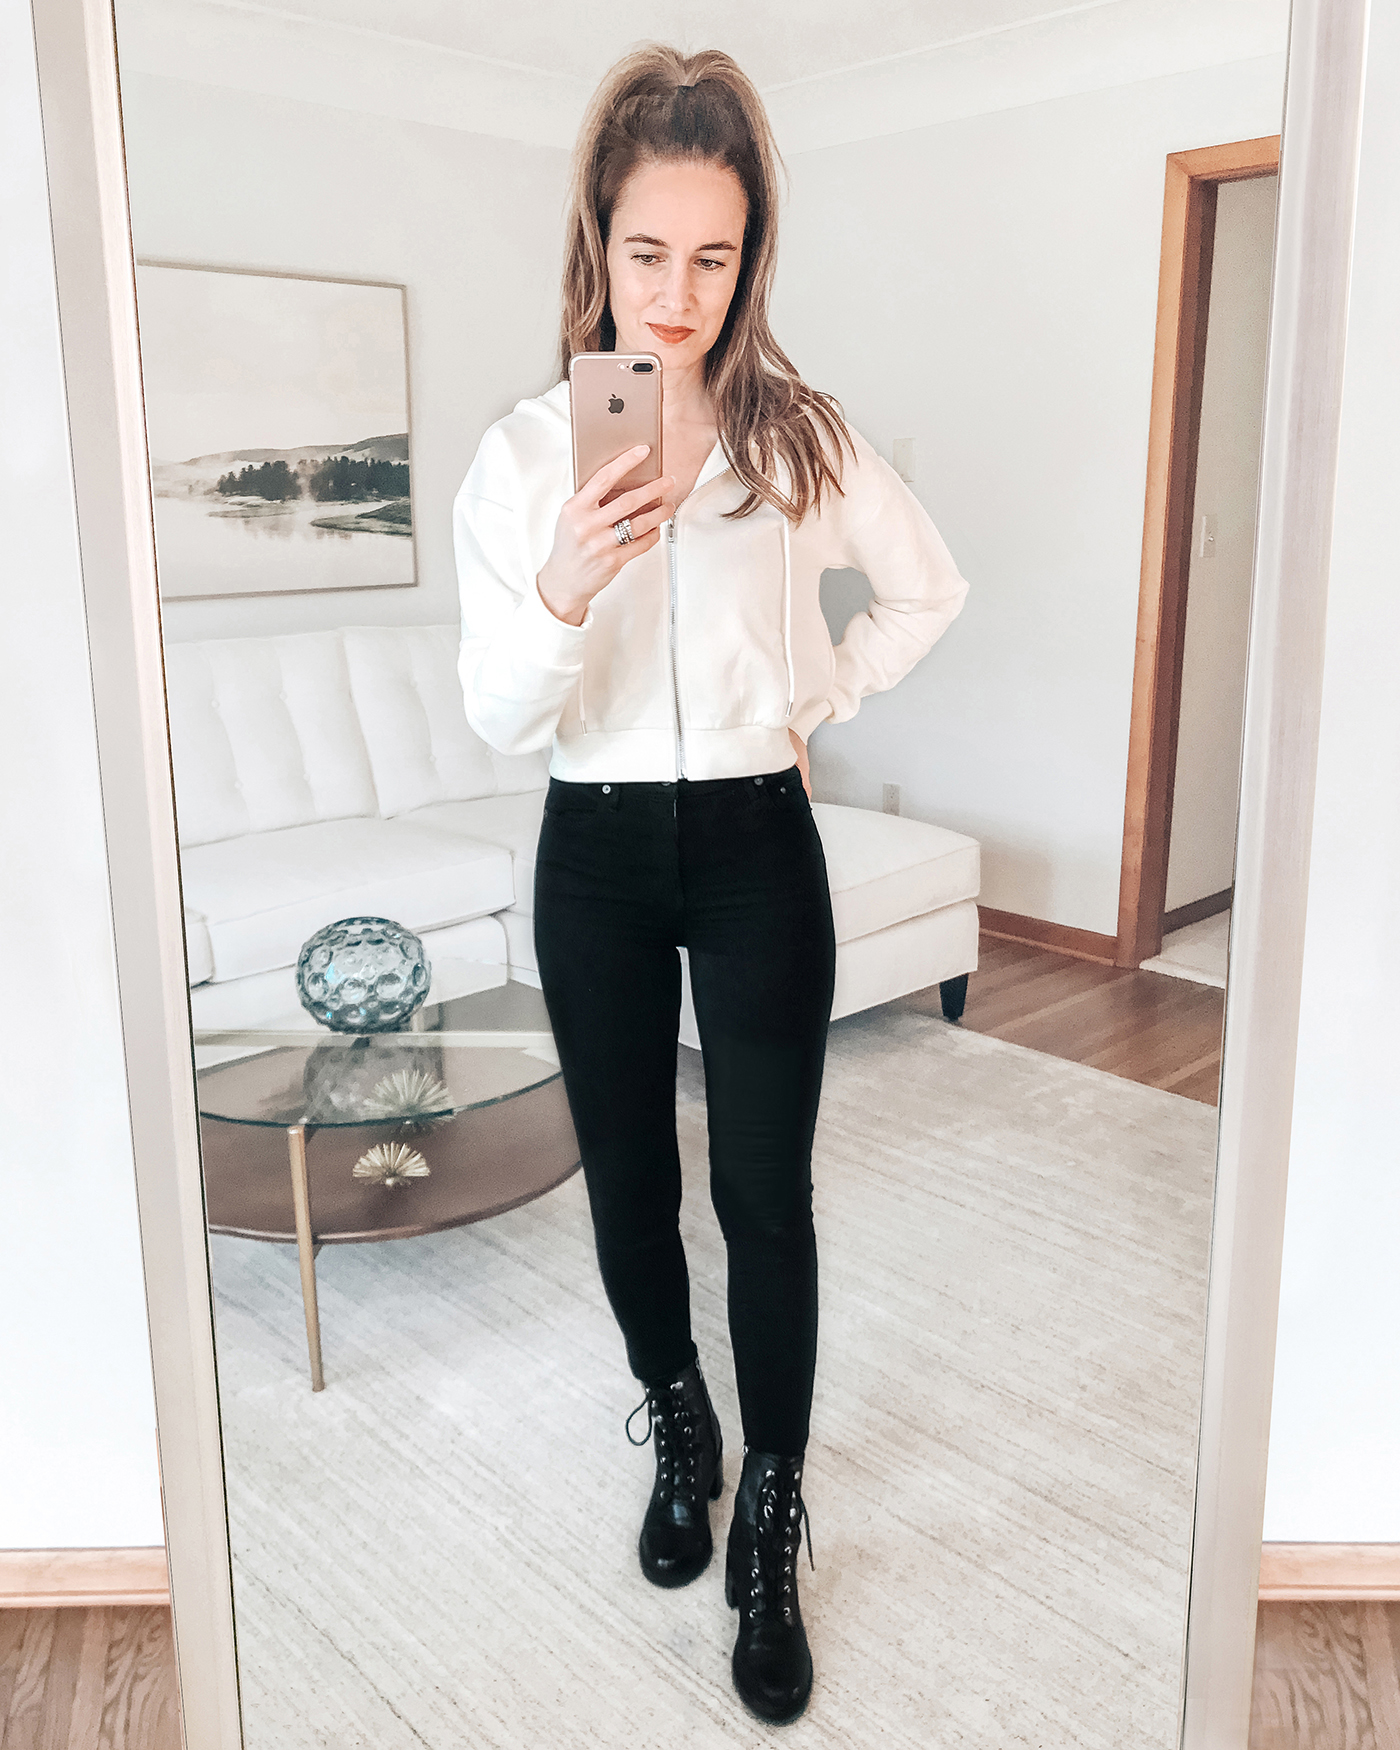 Daily Style Finds: My $15 Hoodie Sweatshirt + Combat Boots